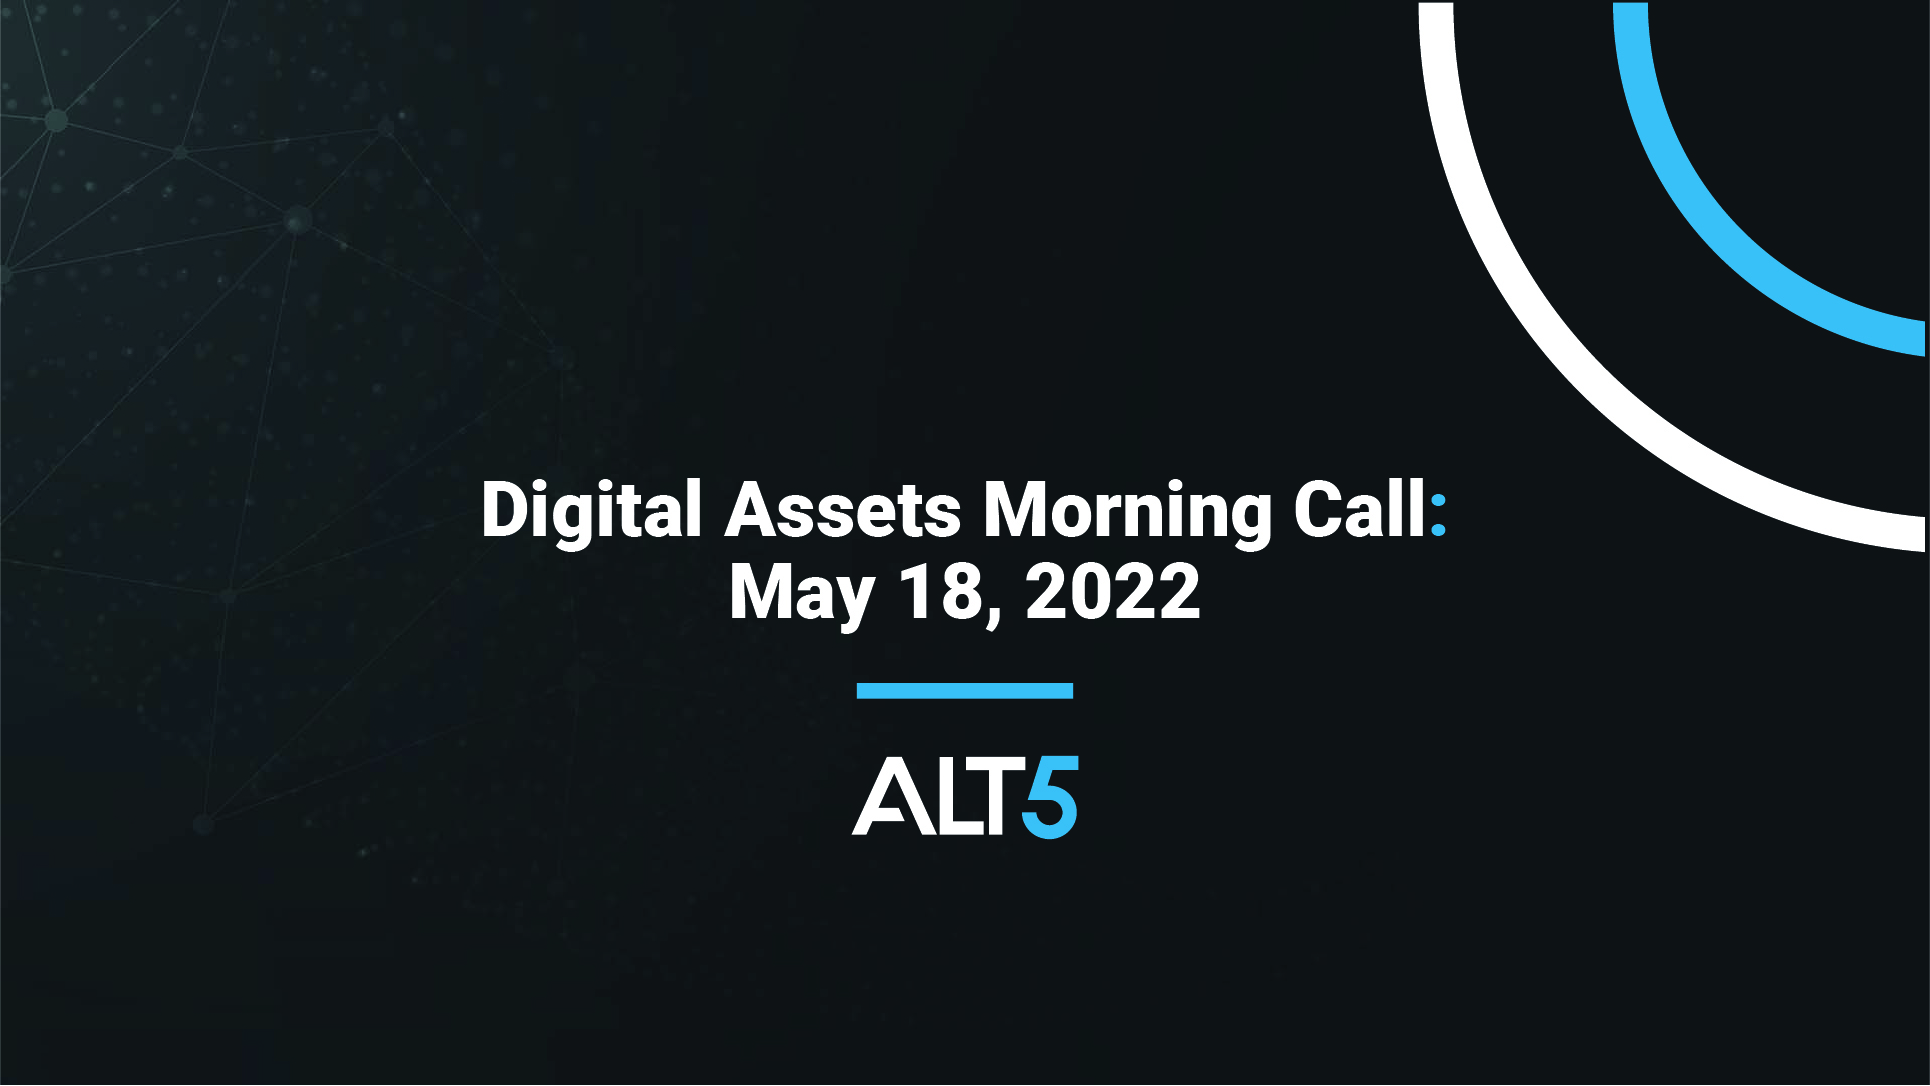 Digital Assets Morning Call: May 18 2022 - Stable coin scrutiny after TerraUSD’s collapse